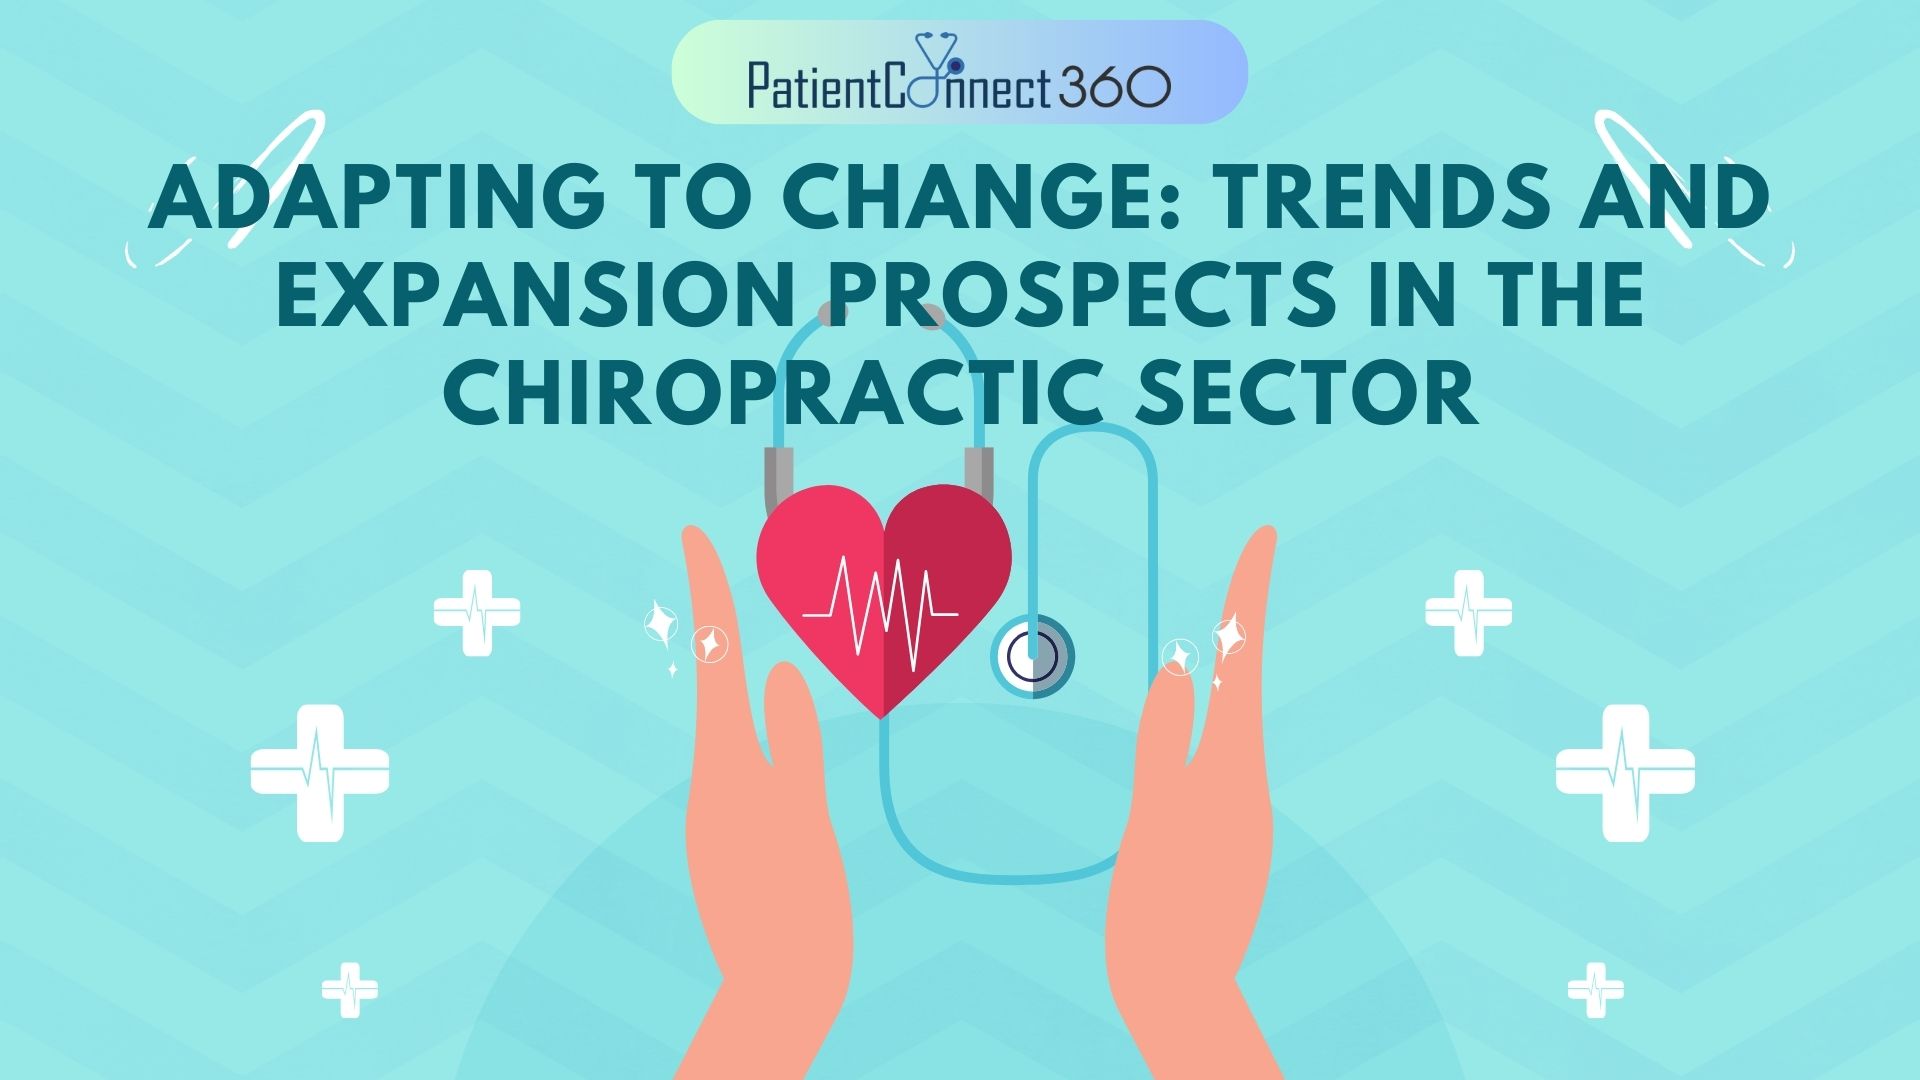 PatientCoRnect 360

ADAPTING TO CHANGE: TRENDS AND
EXPANSION PROSPECTS IN THE
CHIROPRACTIC SECTOR

 
 

&gt;